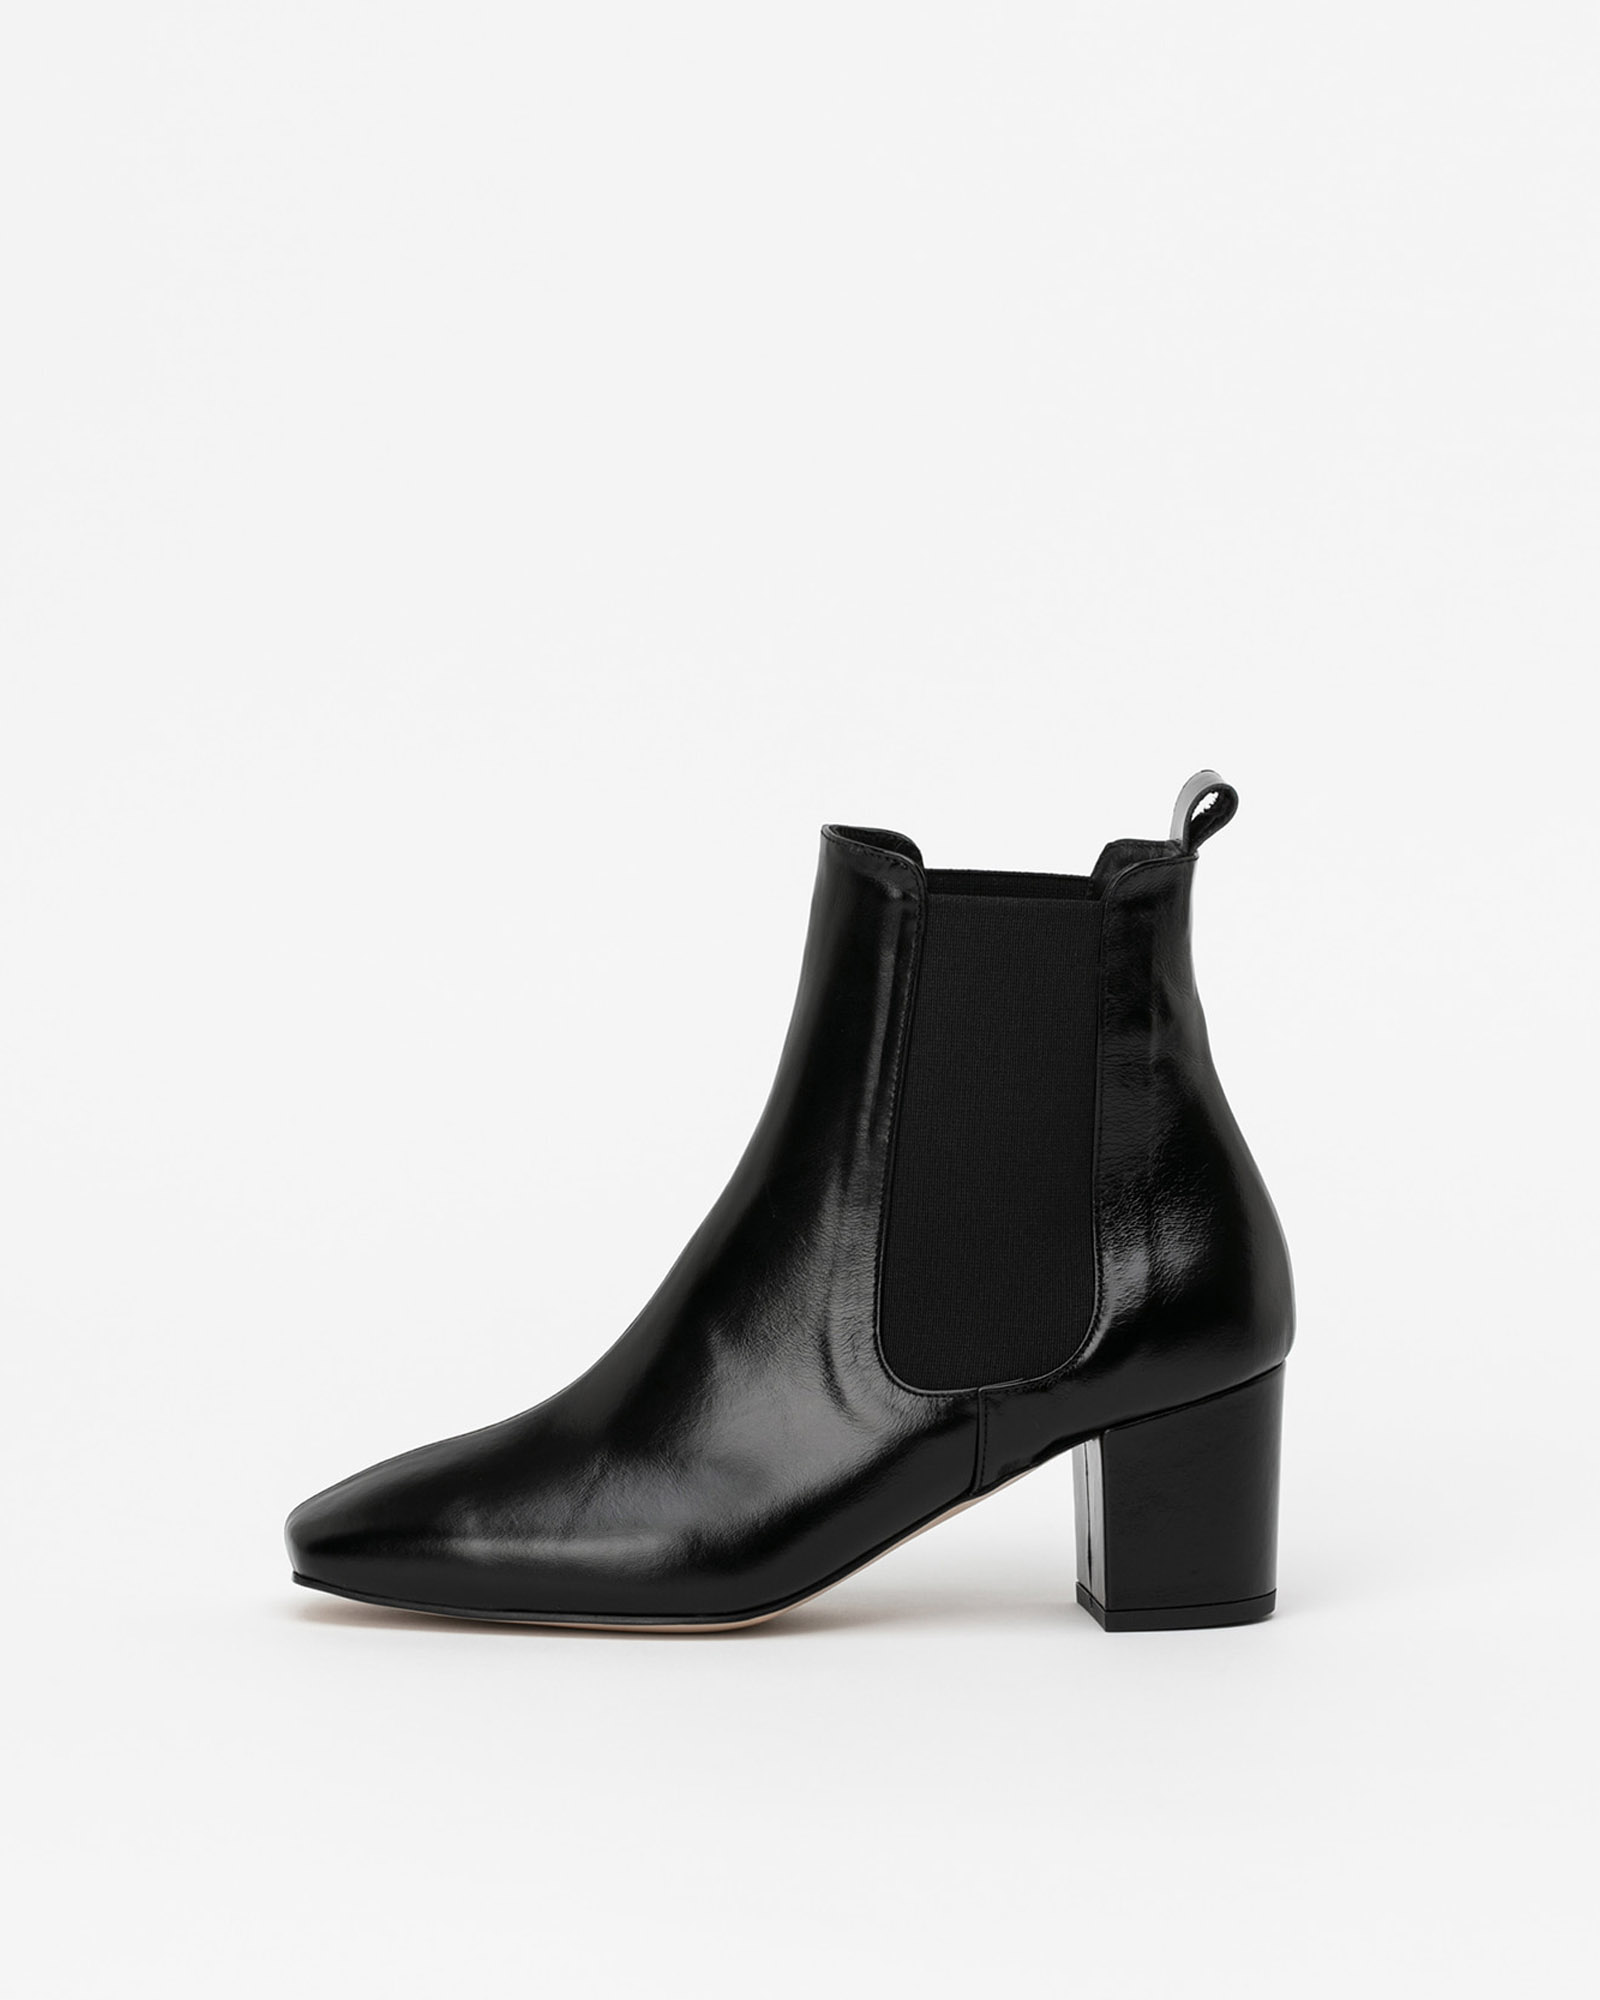 Francois Chelsea Boots in Textured Black